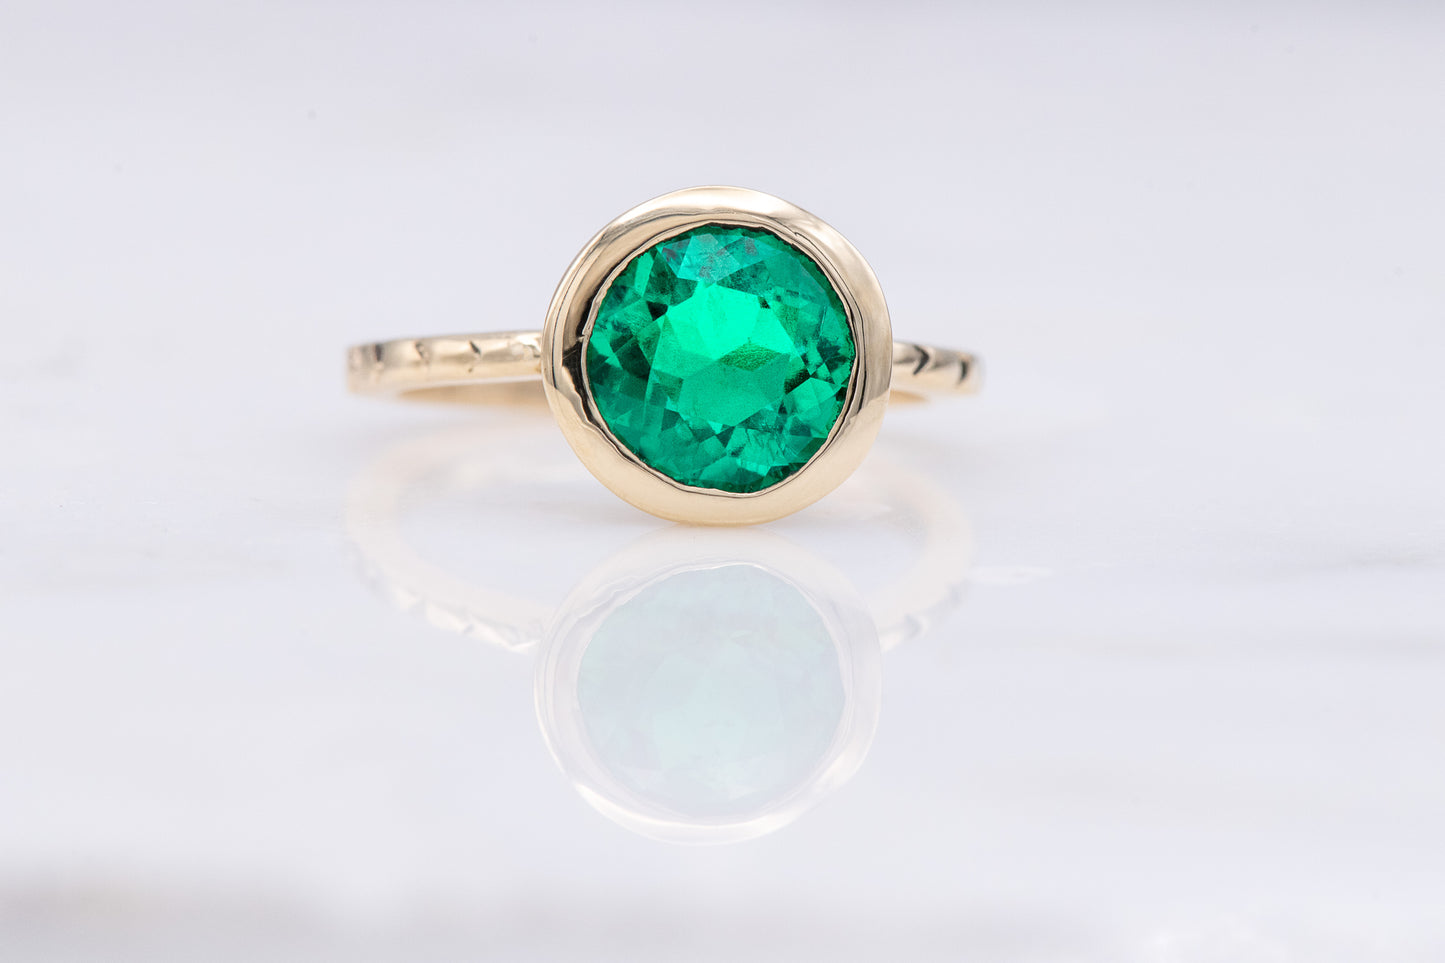 An Emerald and Yellow Gold Handmade Engagement Ring.